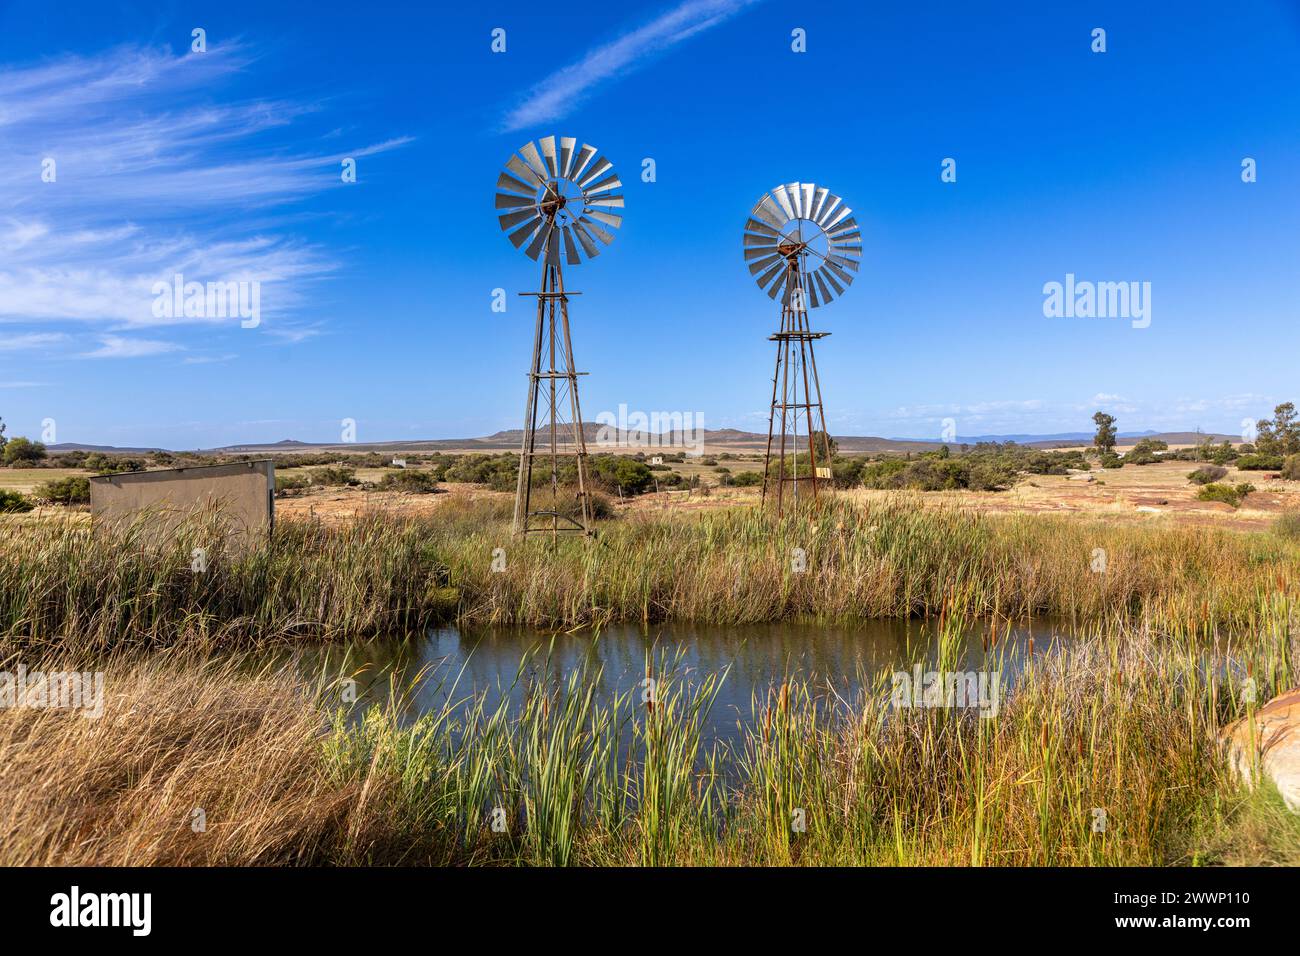 Two old school metal windmills in the semi arid Karoo area of South Africa.  In the foreground is a large pool of water from the windmills. Stock Photo